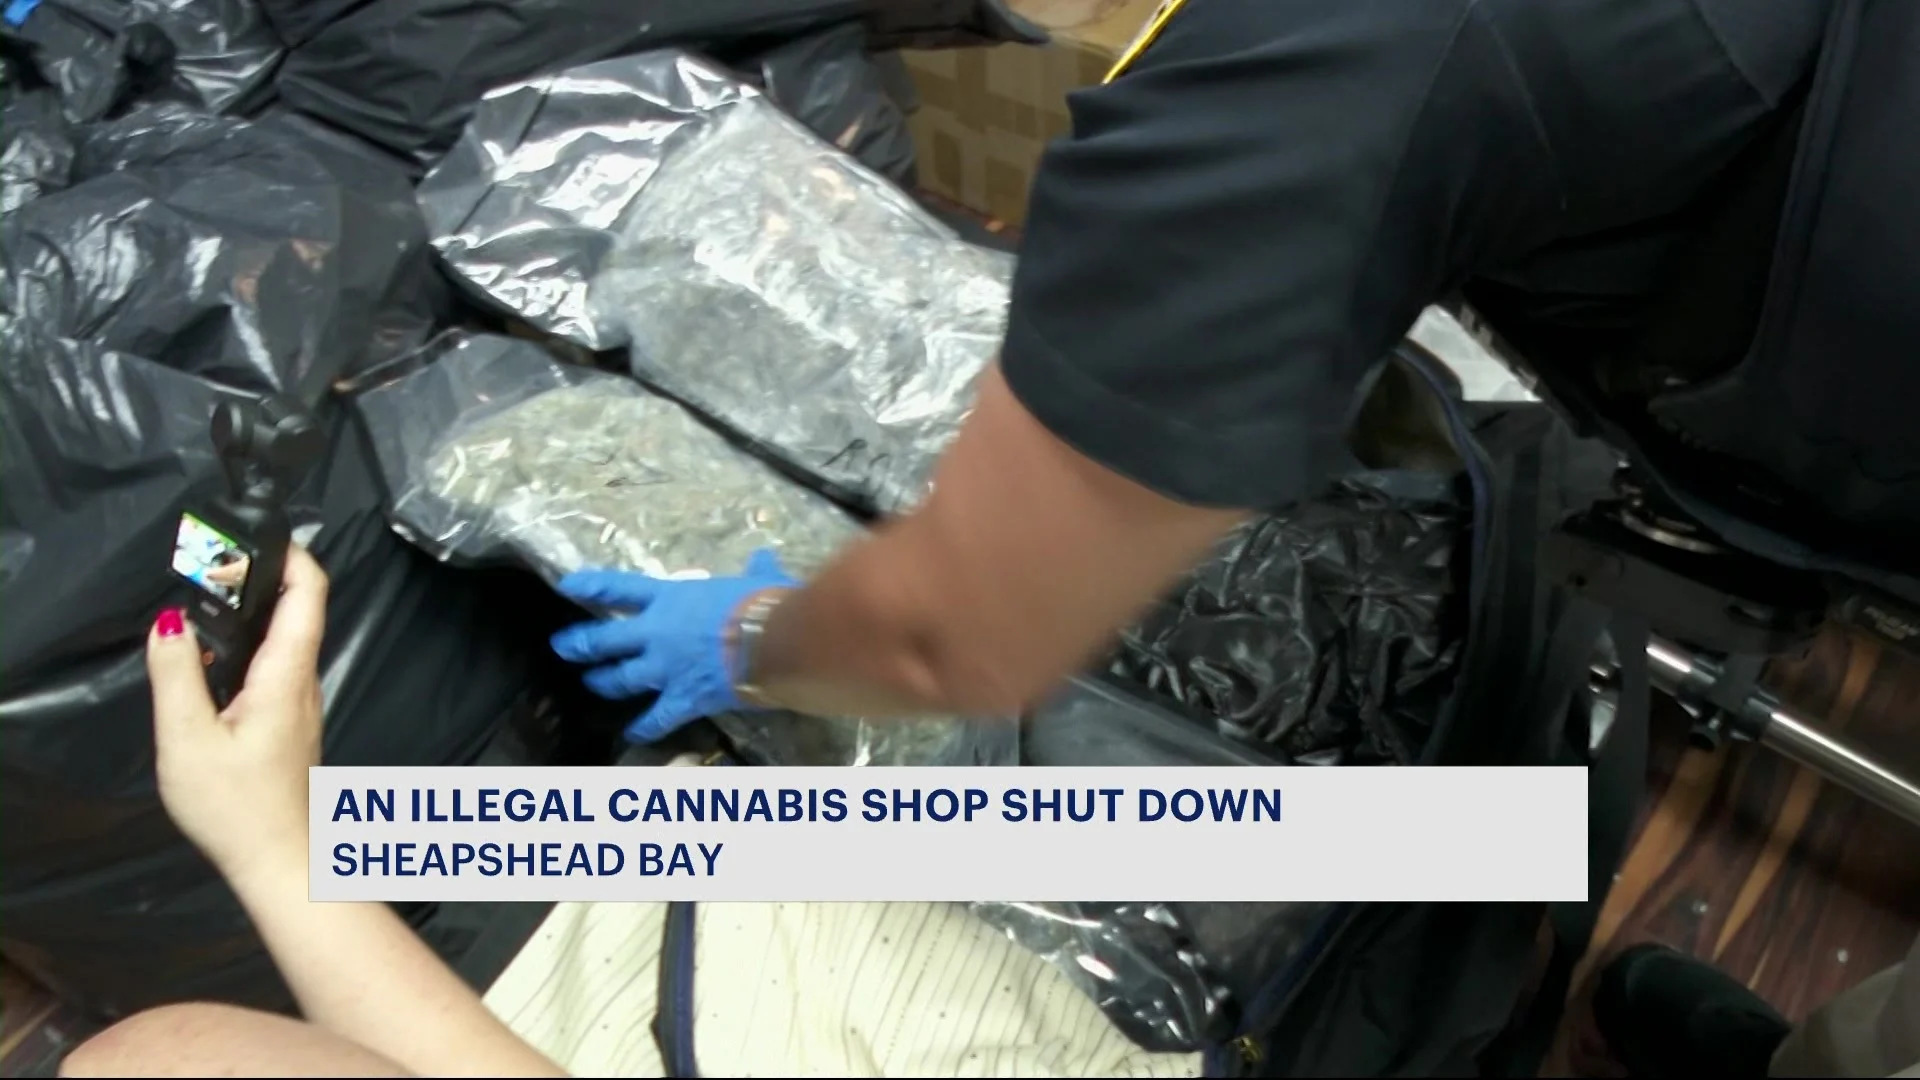 Sheriff's office busts yet another illegal cannabis shop in Sheepshead Bay